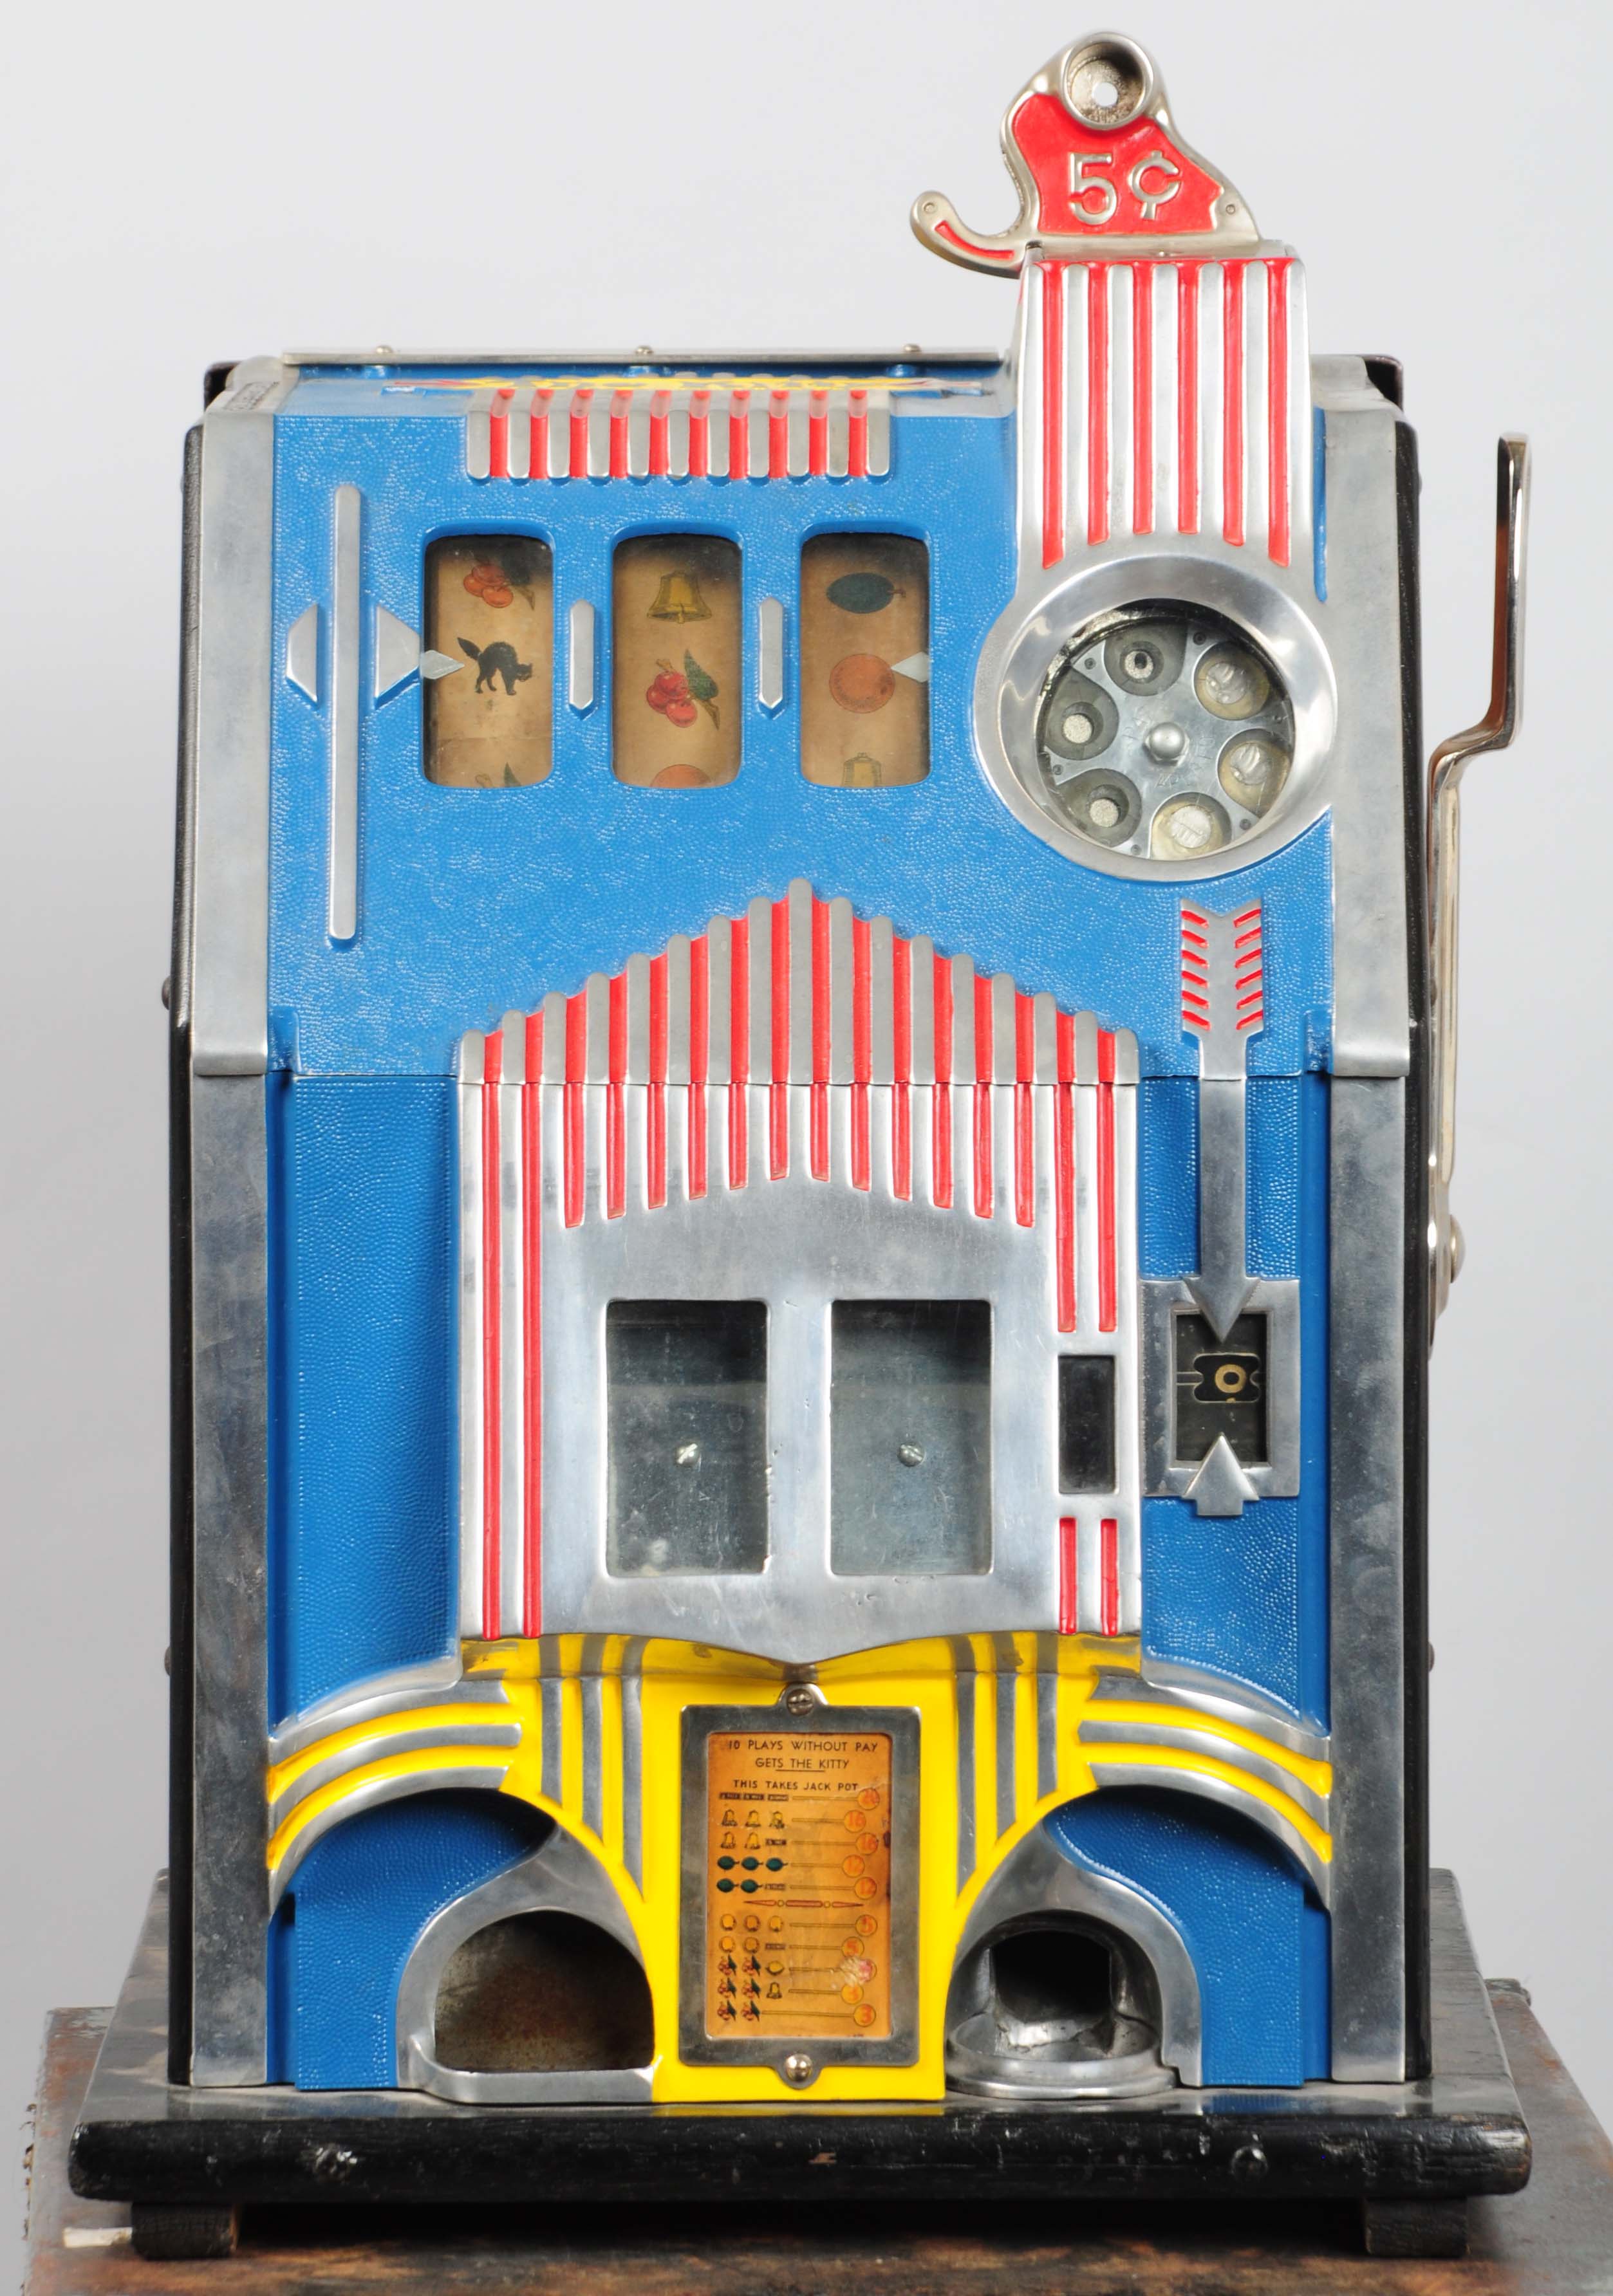 Pace’s “Kitty” slot machine in vibrant primary colors on metal, $7,200. Morphy Auctions image.